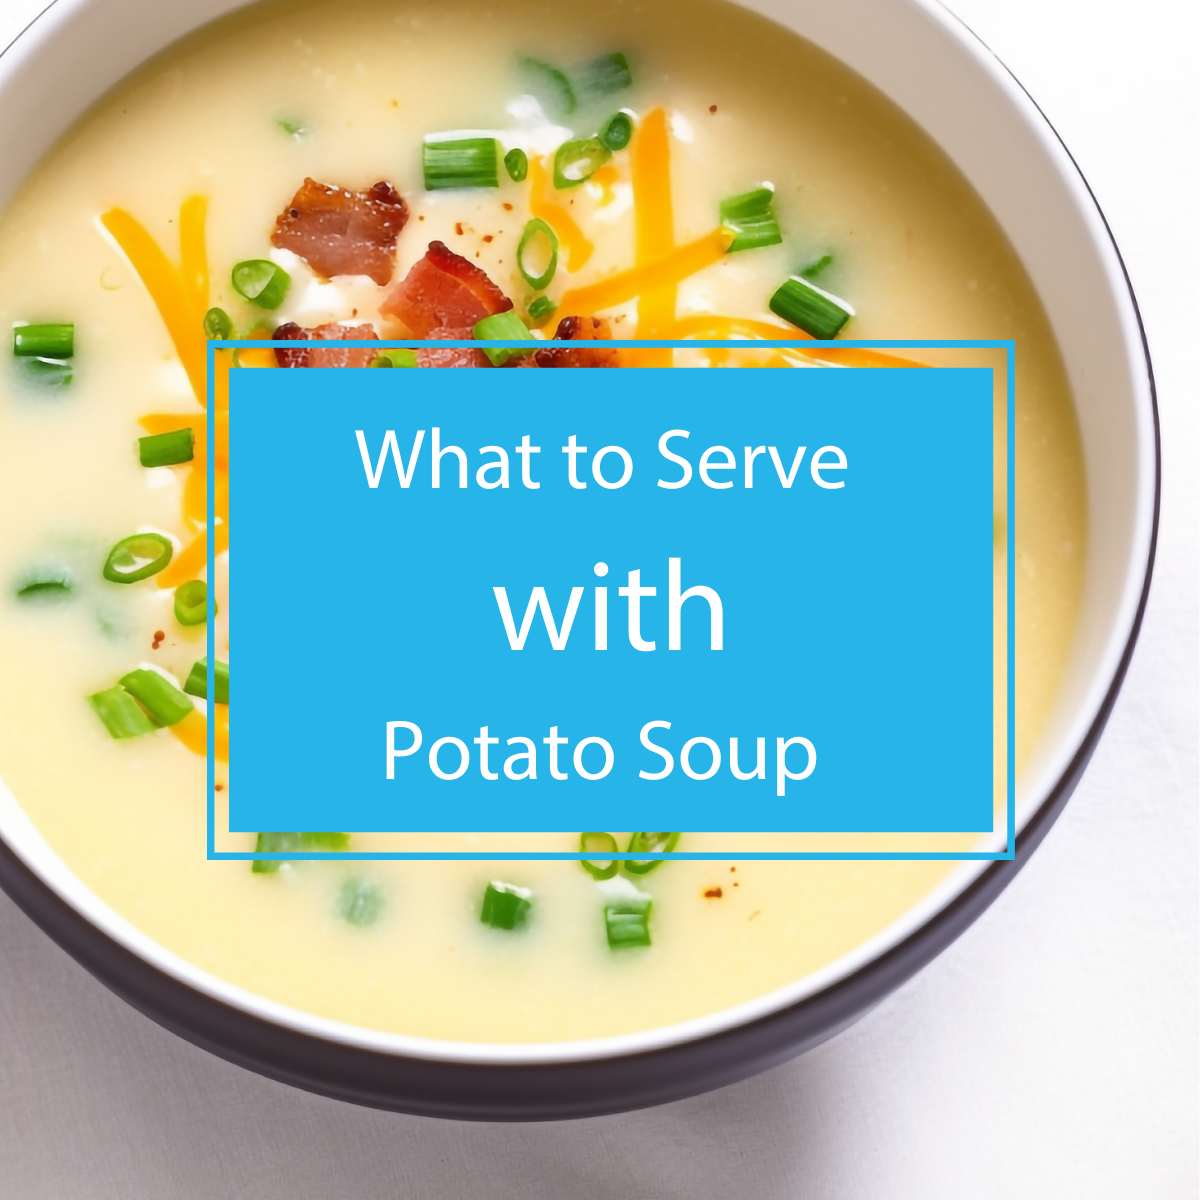 What to Serve with Potato Soup